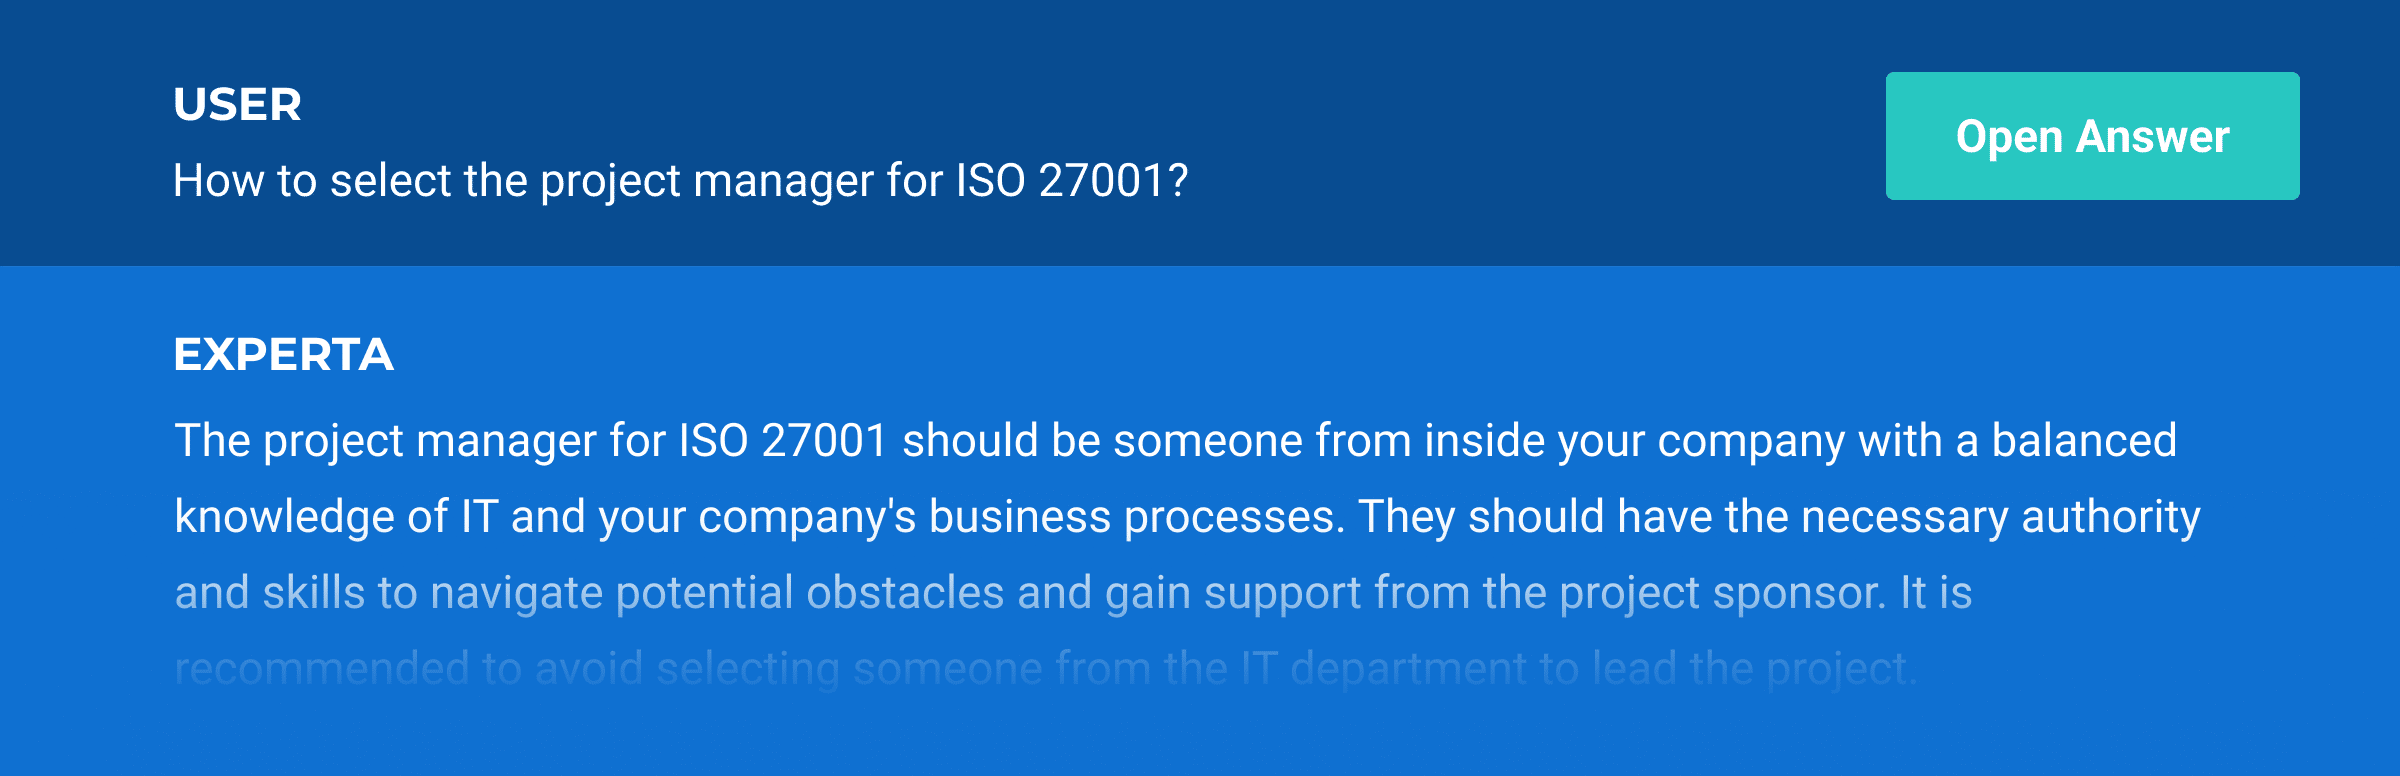 How to implement ISO 27001 using generative AI - 27001Academy